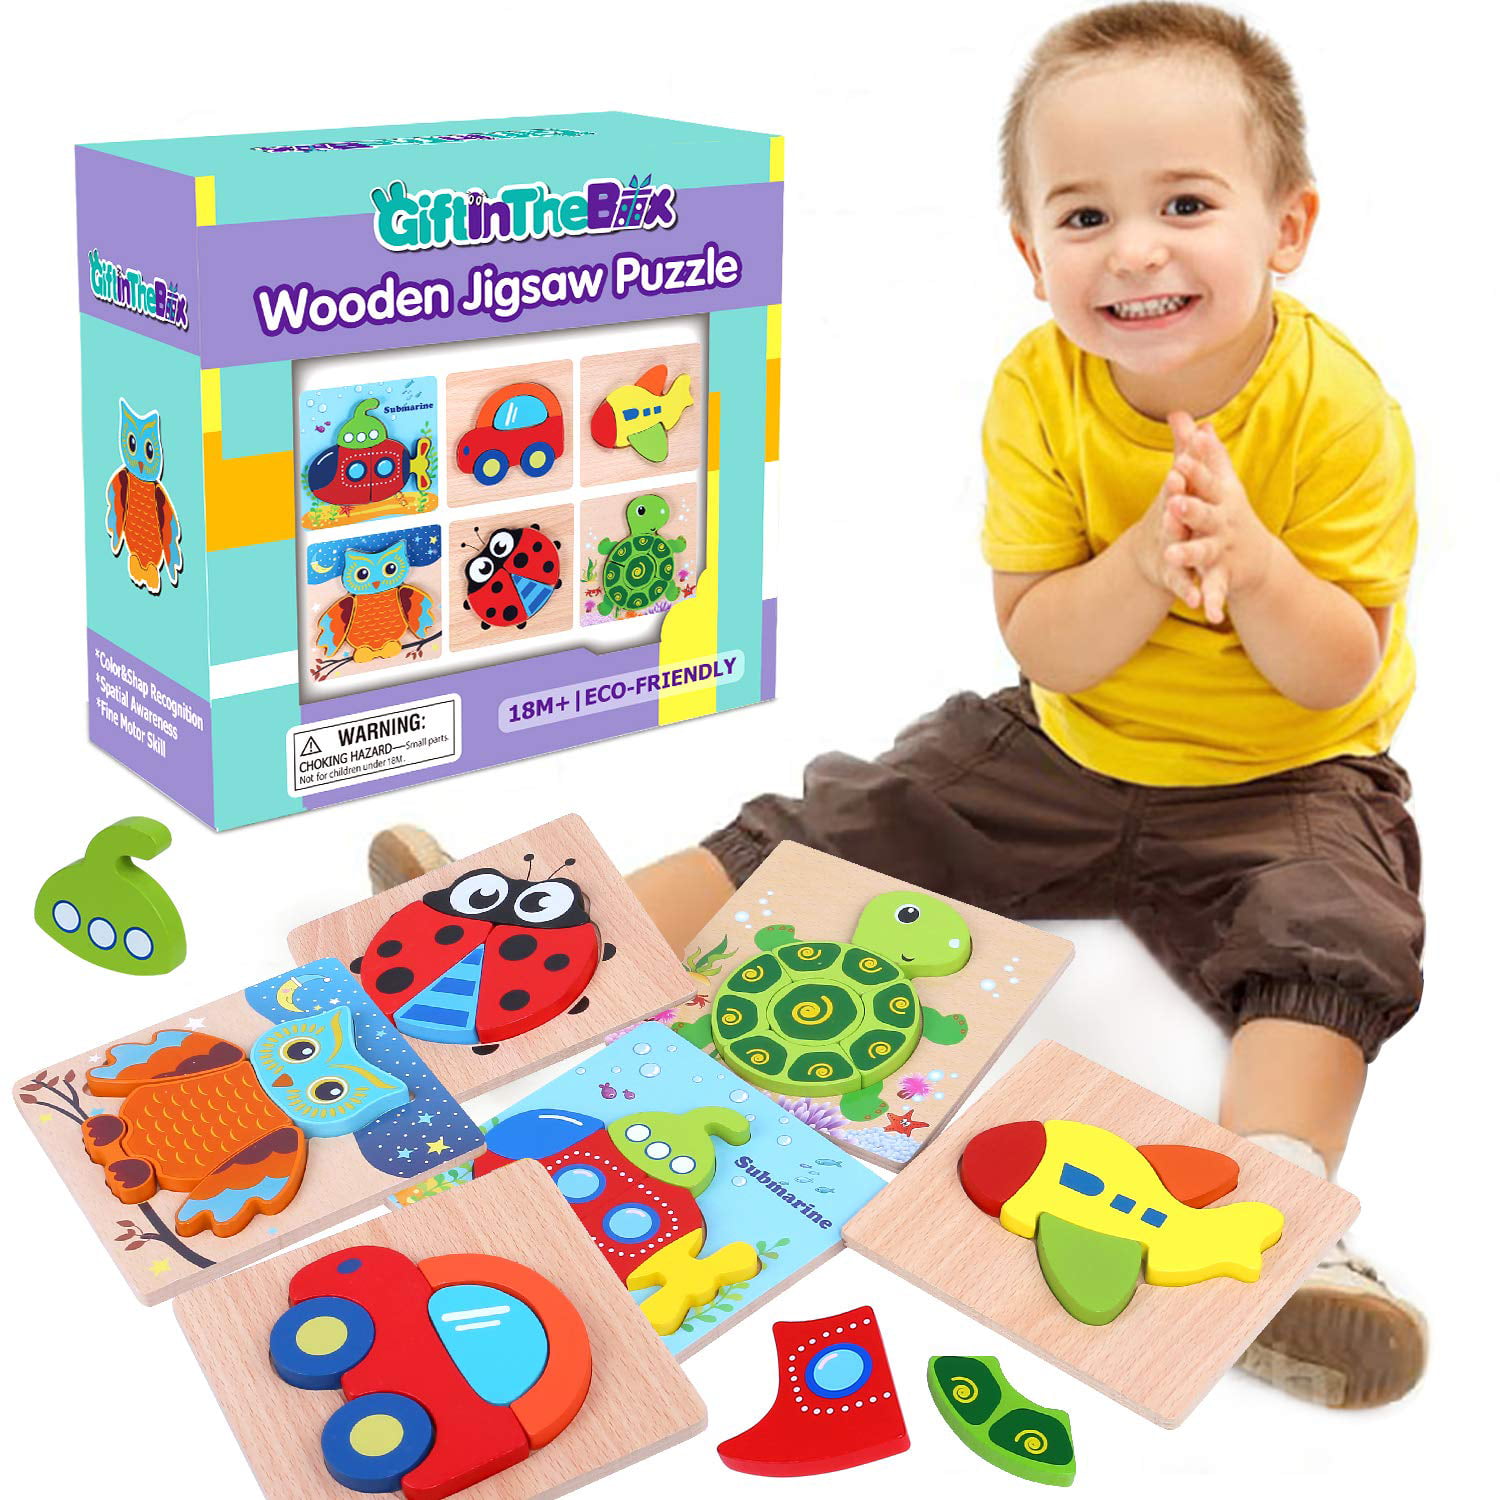 Toddler Puzzles 1 2 3 Year Old Wood Puzzles for Kids 2-4 Girls Boys Baby Child Preschool Toys 12-18 Months Learning Educational Toys Animal car Shape Jigsaw Gift Toddler Travel Toys for Plane 3pcs